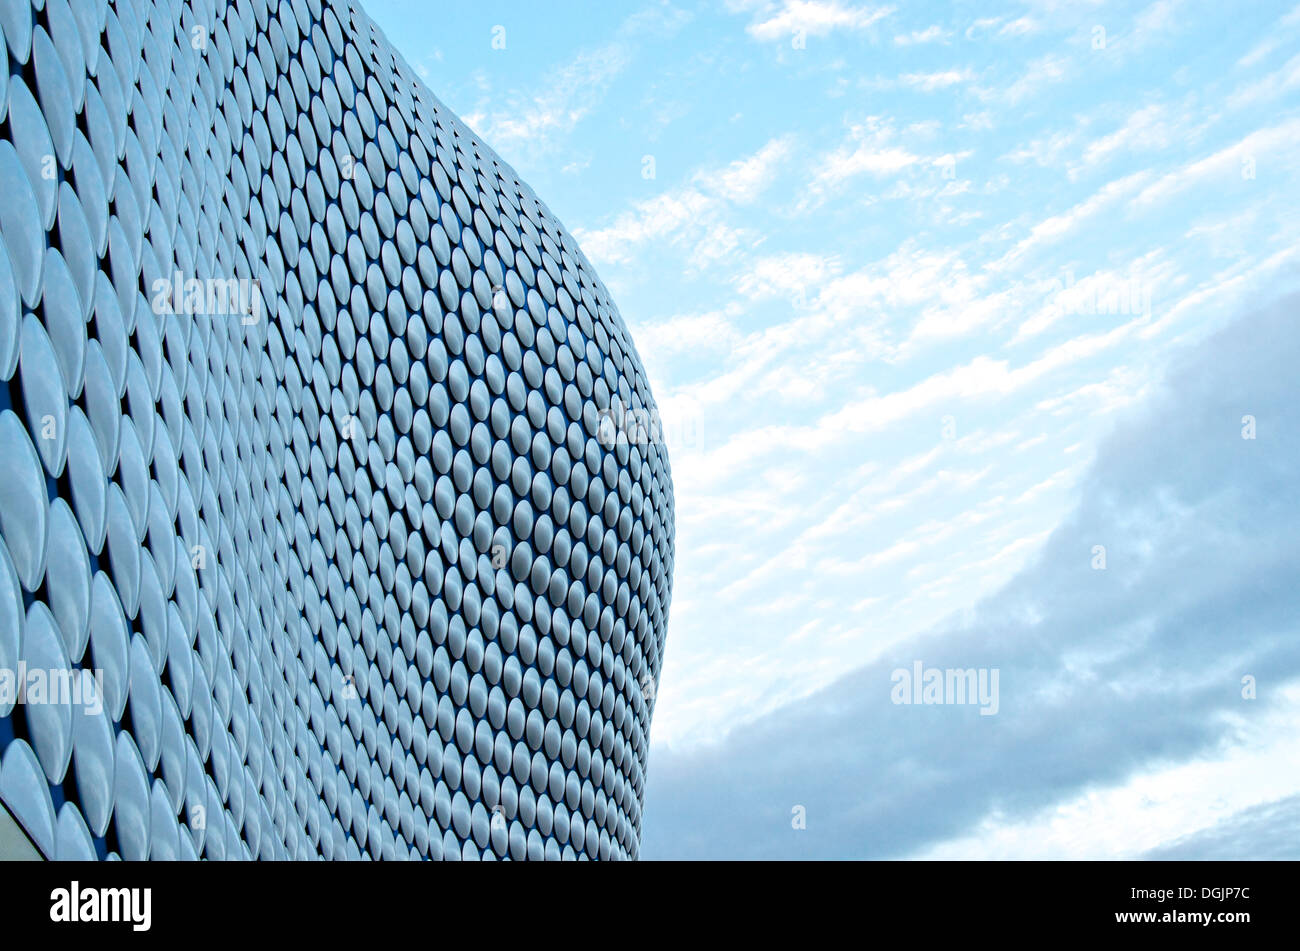 Outline of Selfridges building in Birmingham, UK against blue sky and trailing clouds. Stock Photo